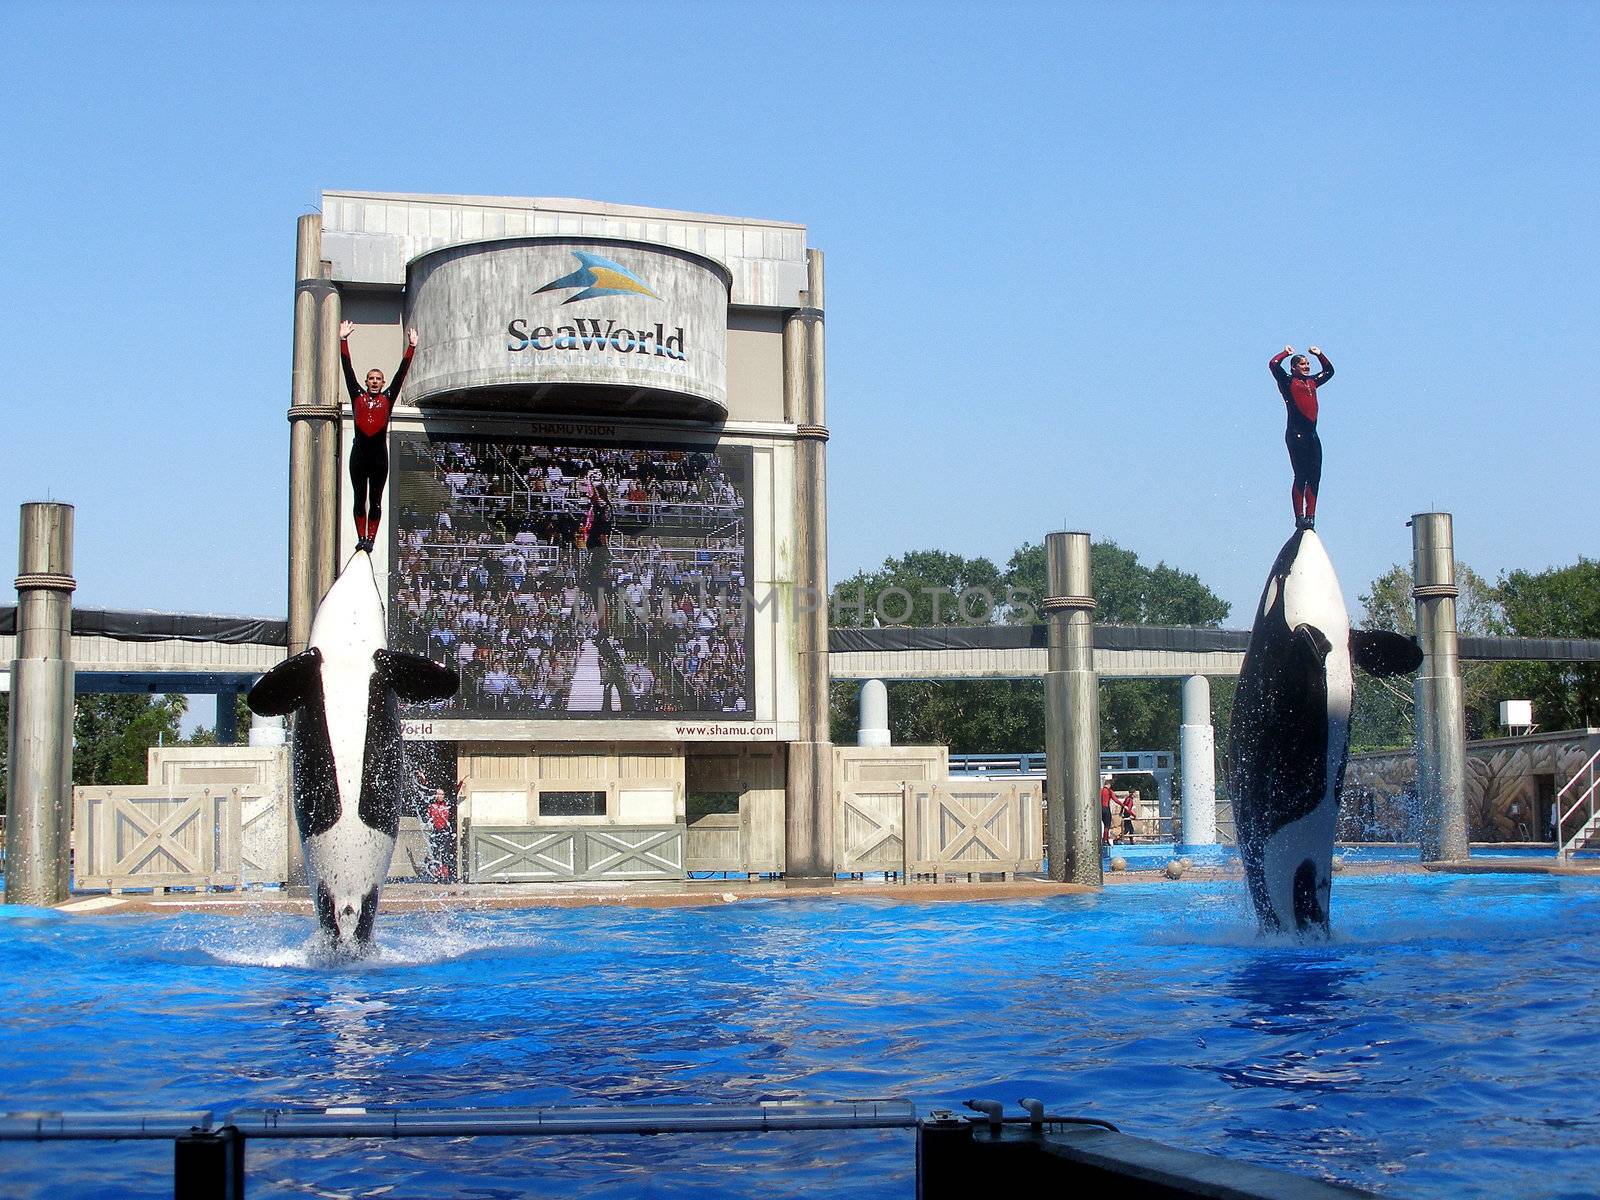 2 Killer Whales jumping up in Shamu show in Seaworld.